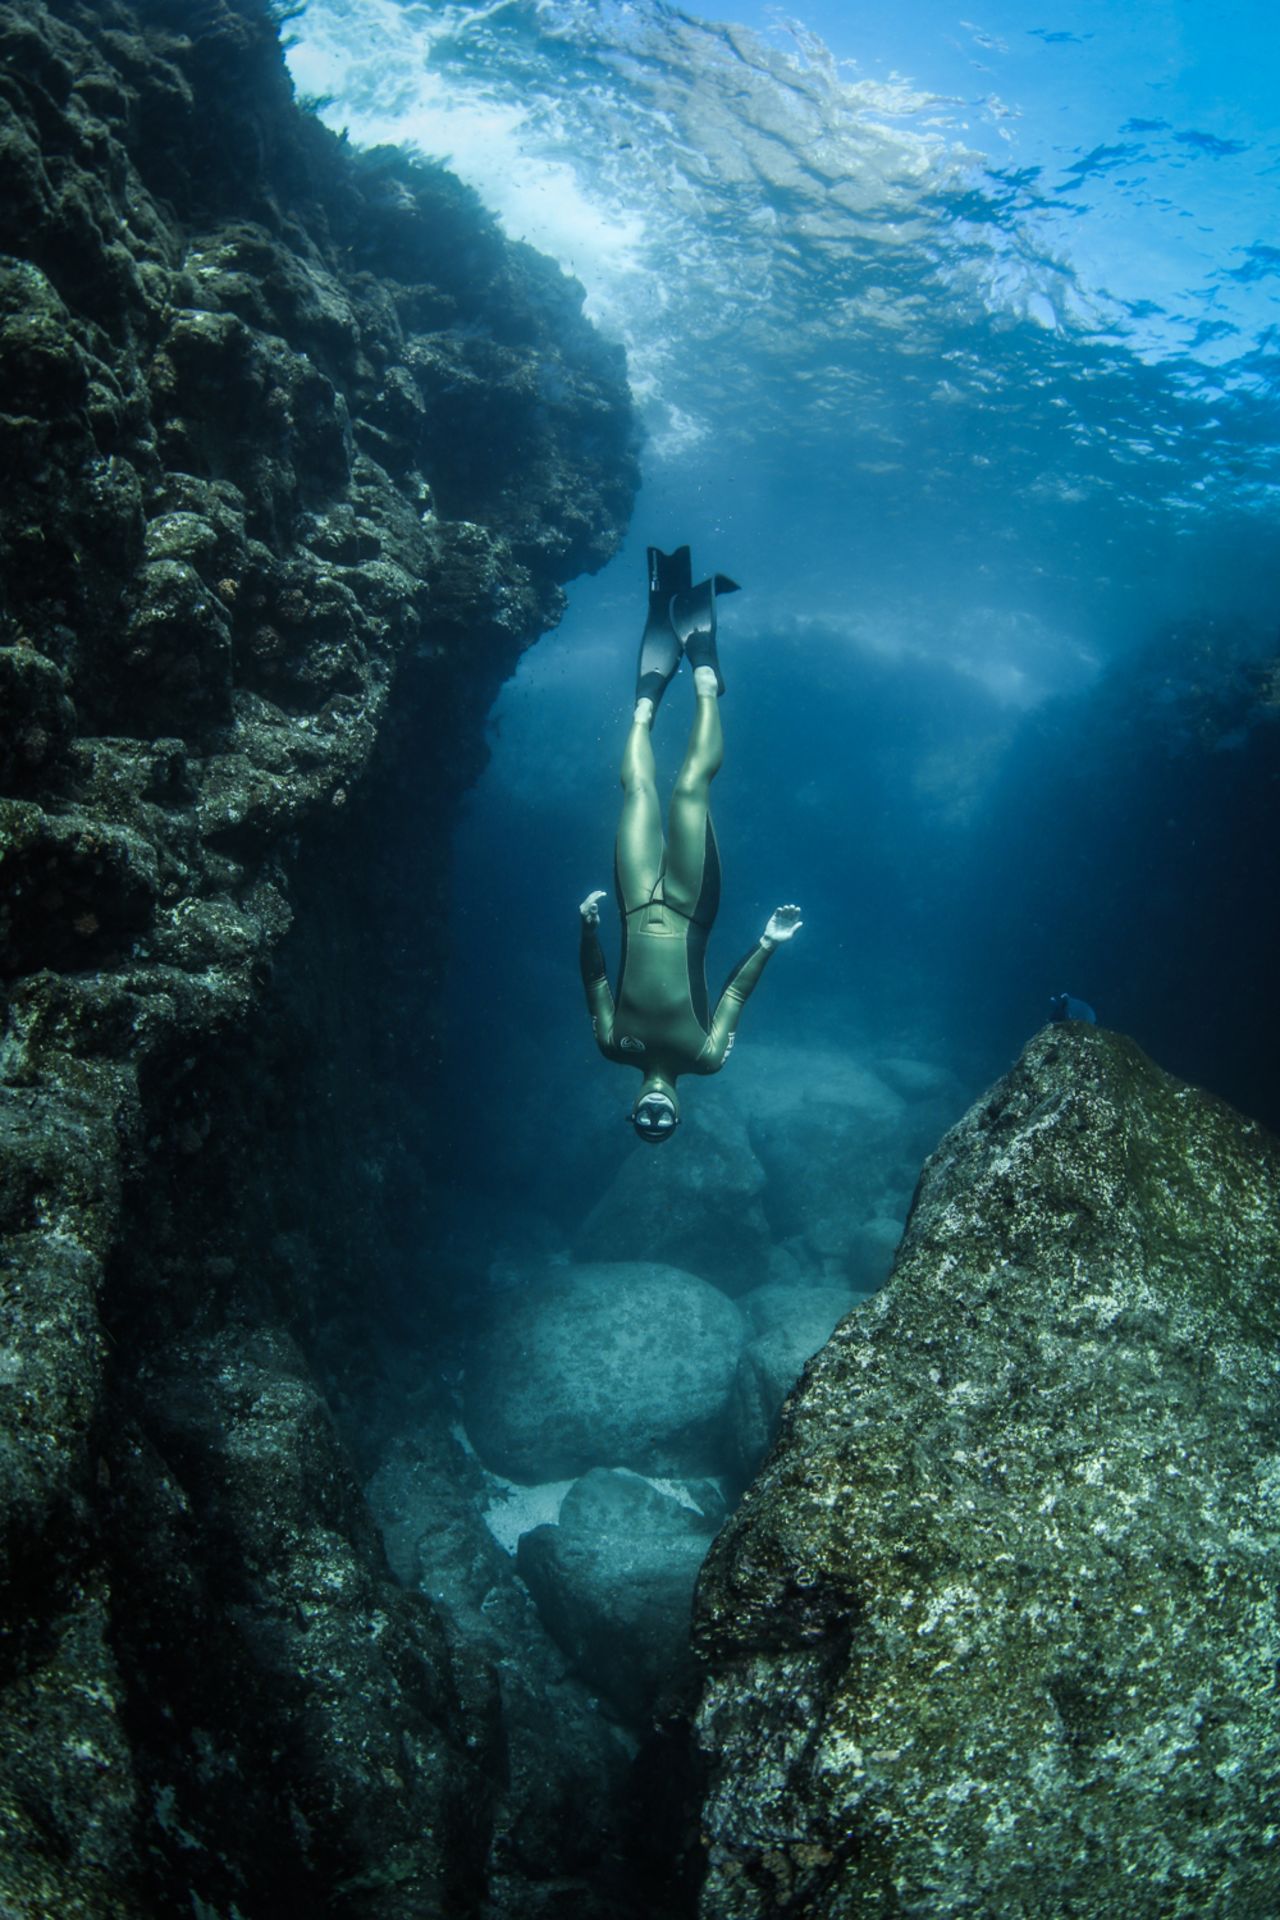 "My friends who freedive while shooting often smirk at the limitations of movement that I have on scuba equipment," she added.<br />"I can't simply follow him up and down to the surface, as I risk getting 'the bends.'"